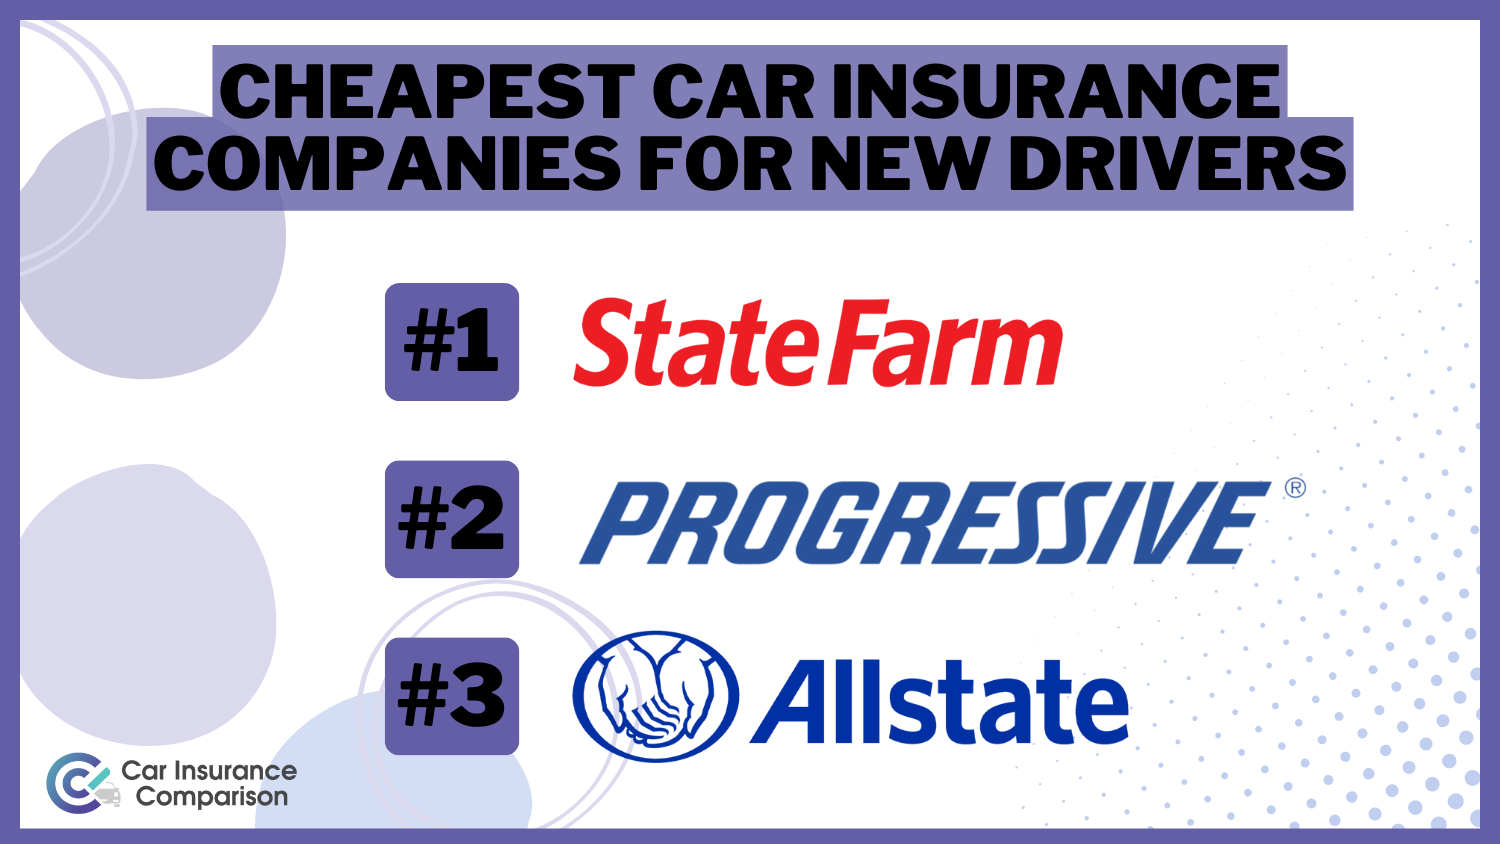 Cheapest Car Insurance Companies for New Drivers: State Farm, Progressive, and Allstate